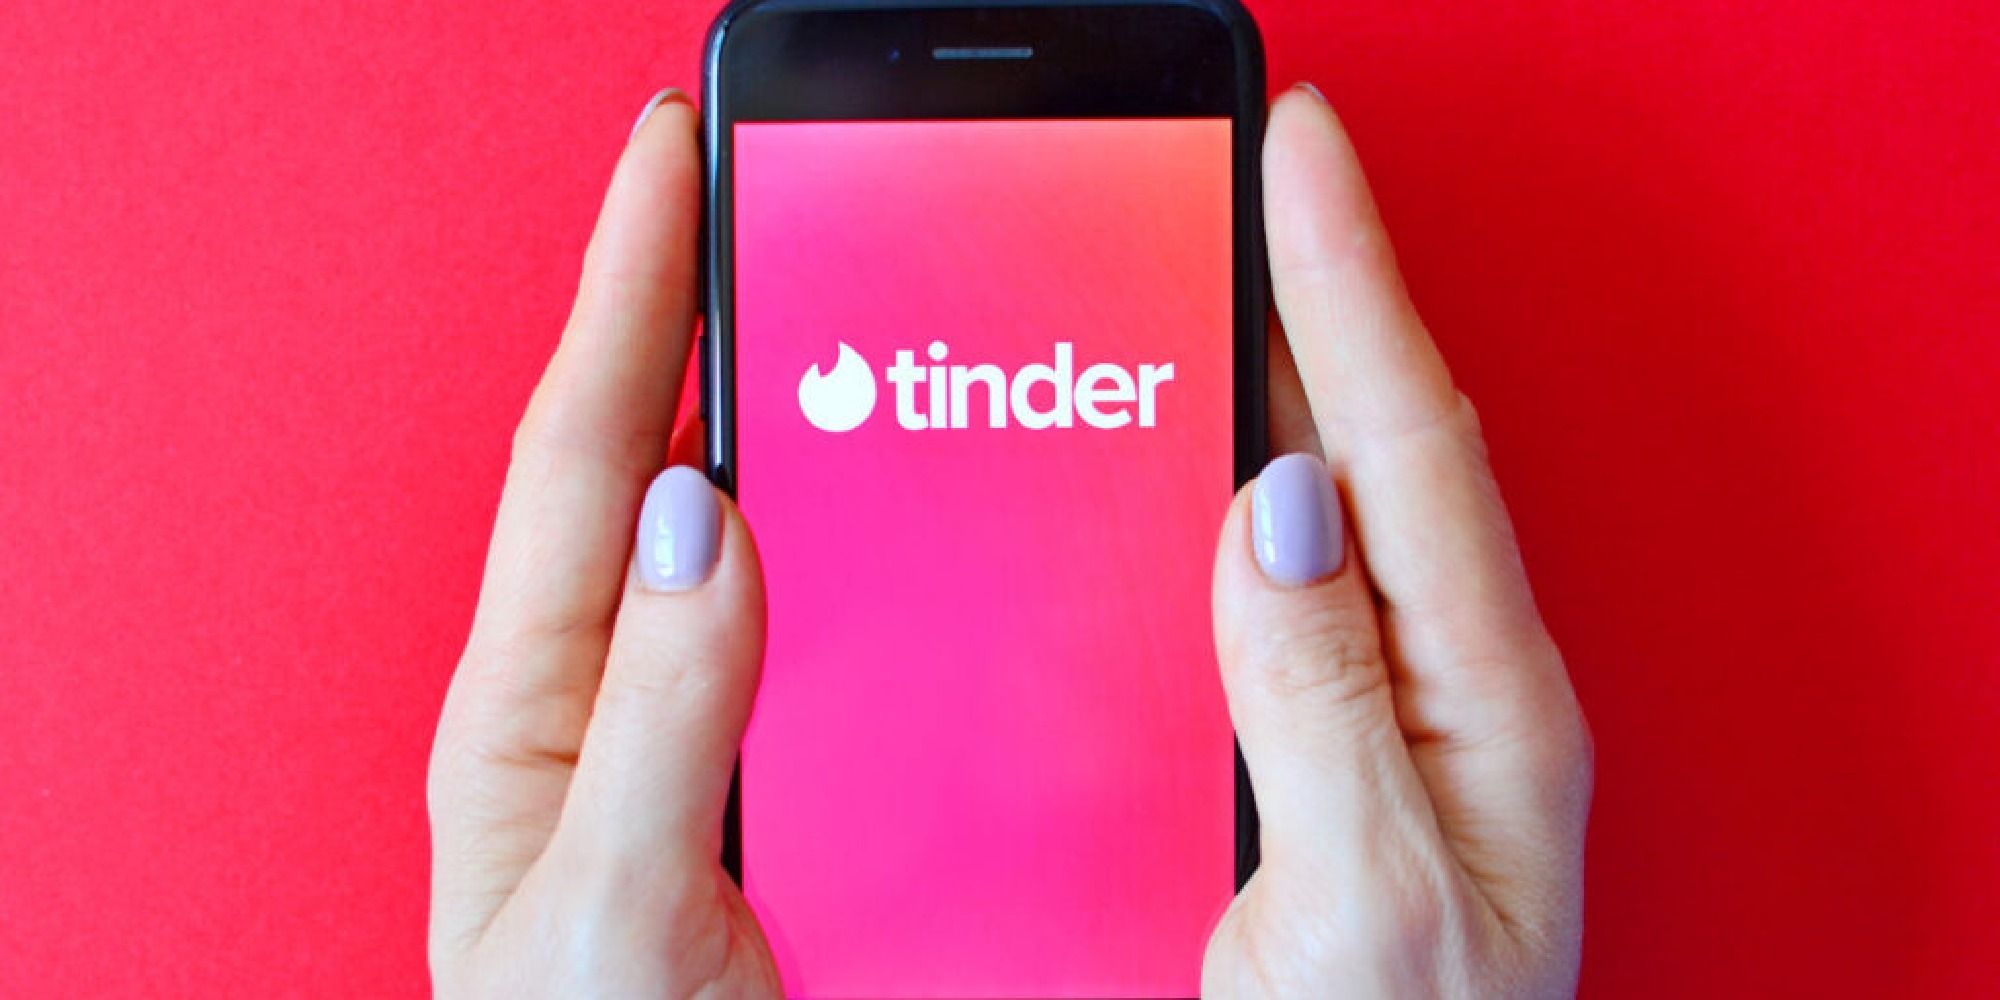 How to search for new matches on Tinder